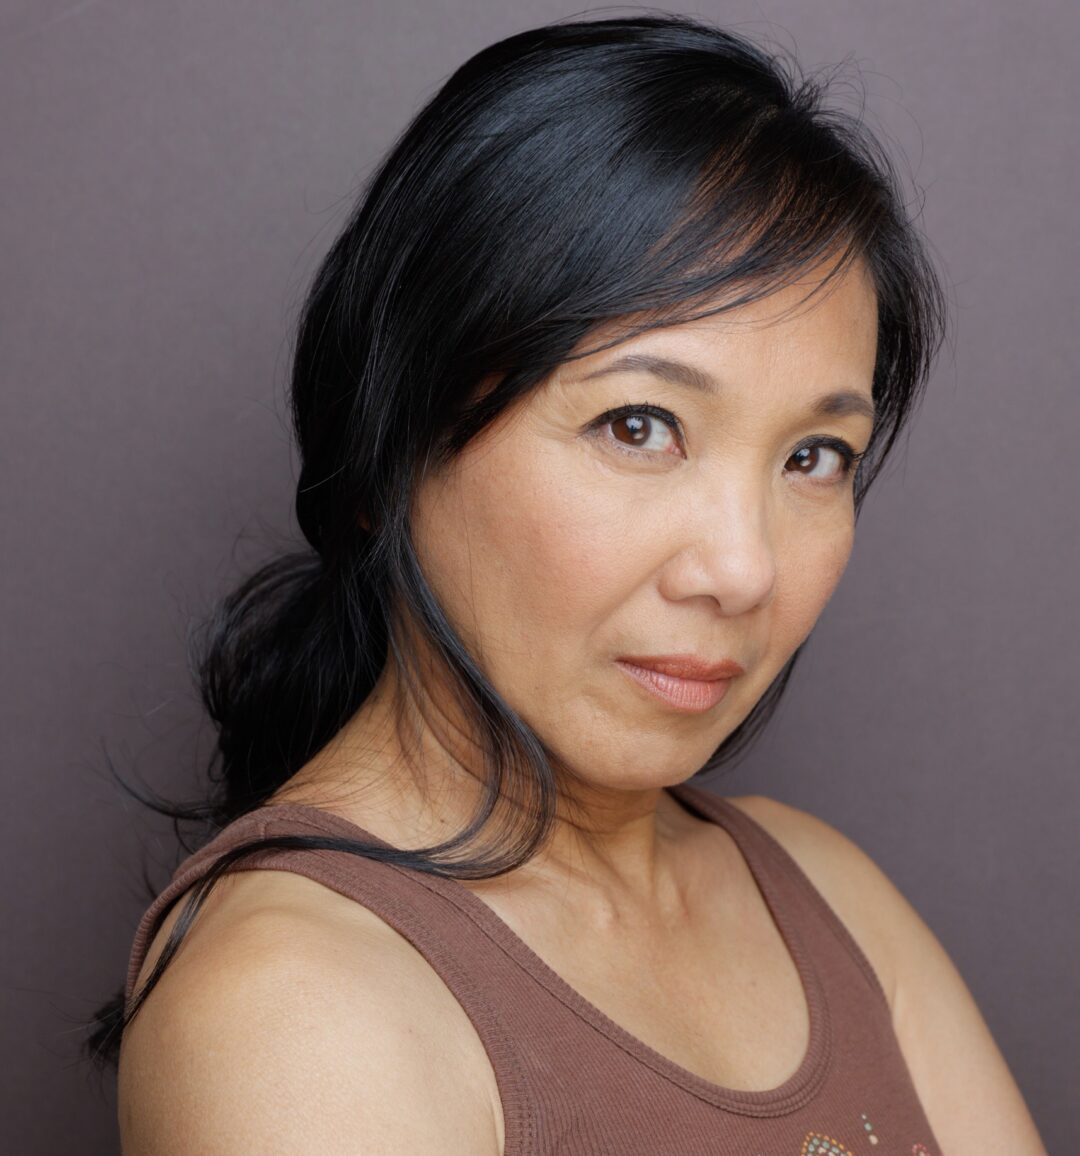 Jennifer Aquino with hair back and in a brown tank